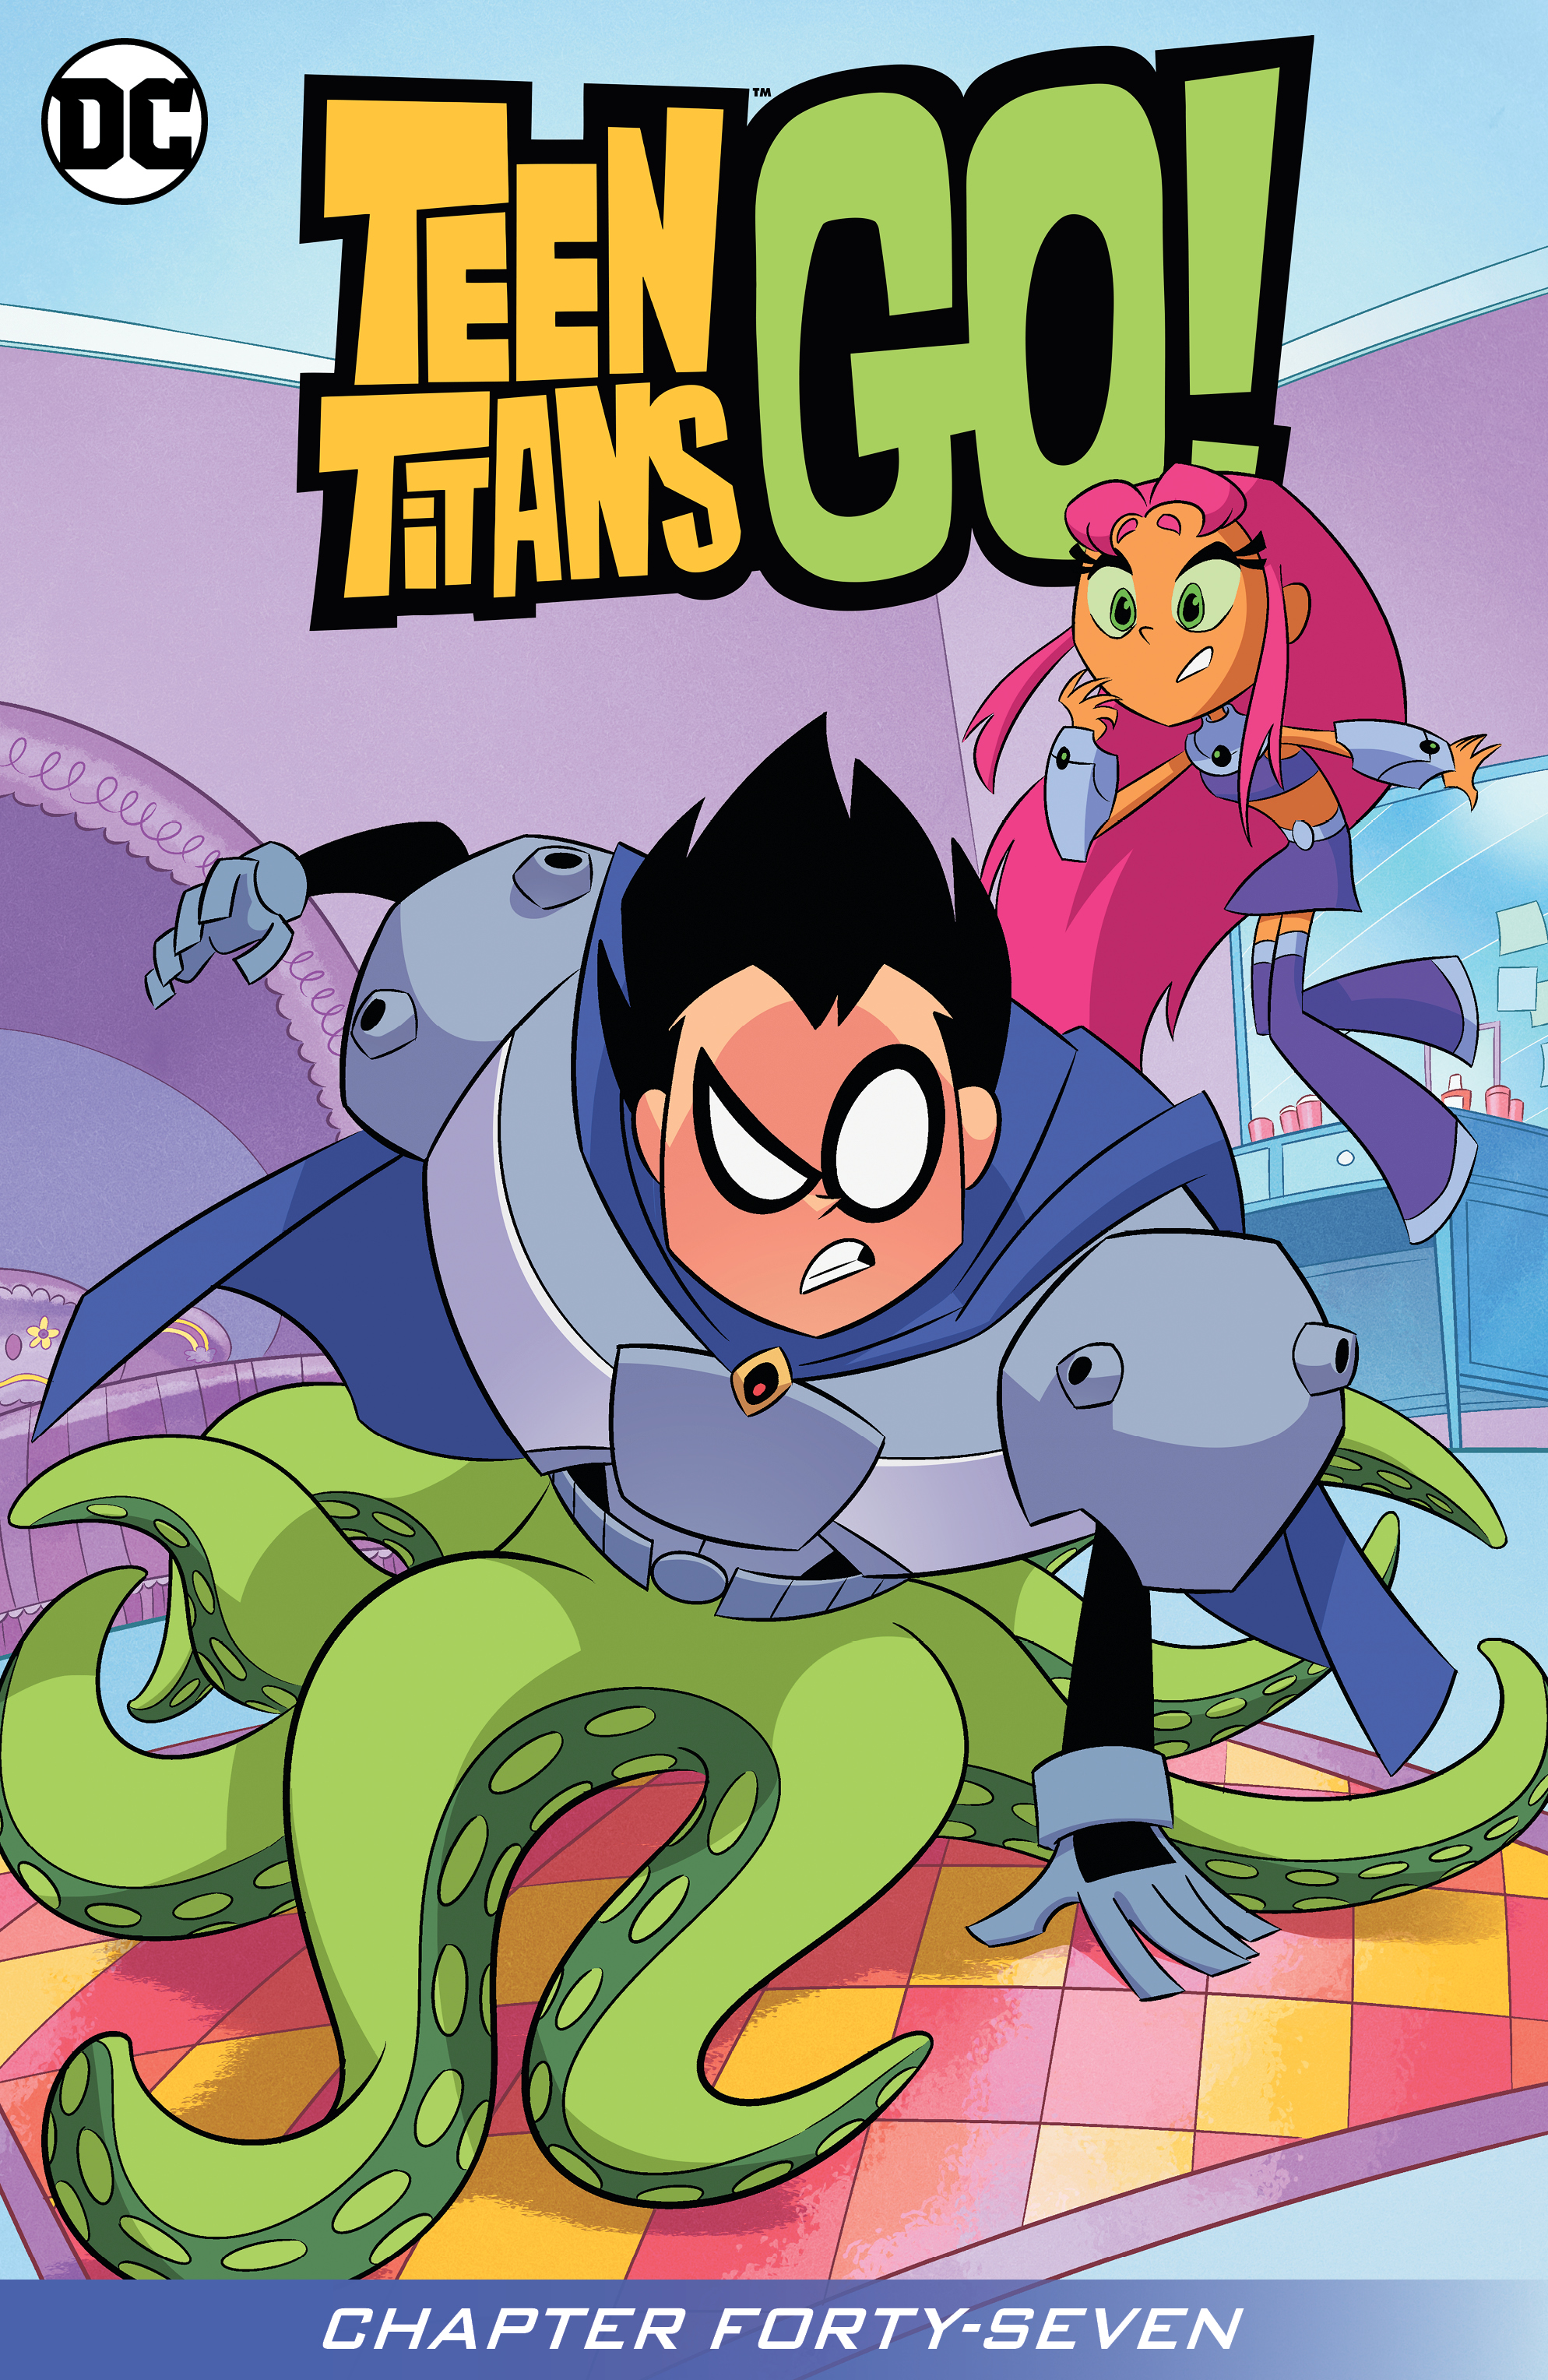 Teen Titans Go! (2013-) #47 preview images